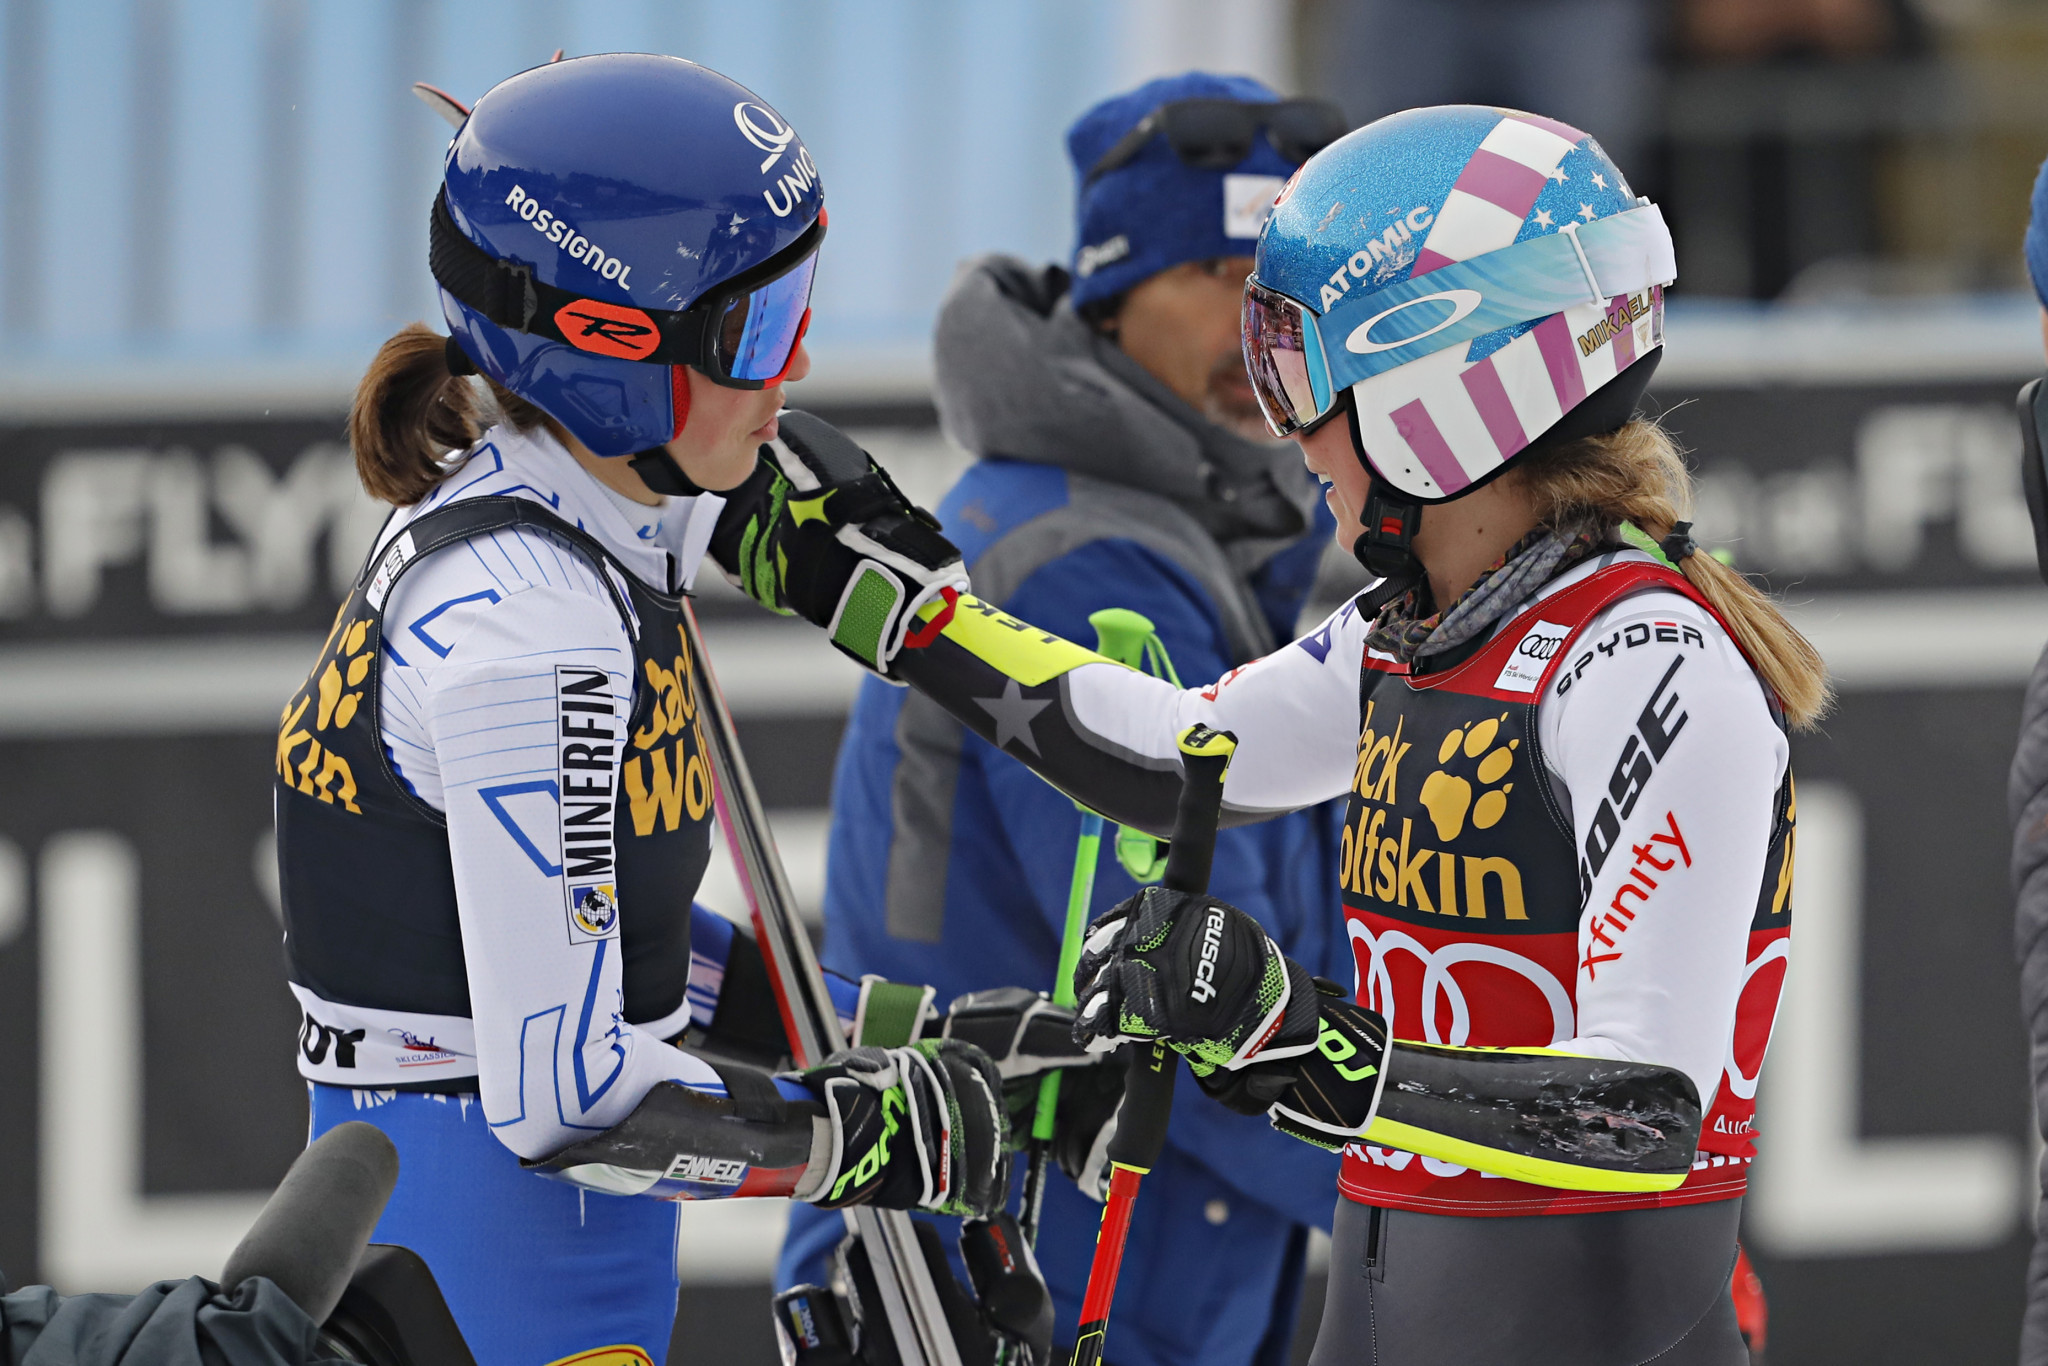 Petra Vlhová, left, and Mikaela Shiffrin, right, shared victory at the FIS Alpine Skiing World Cup in Maribor ©Getty Images